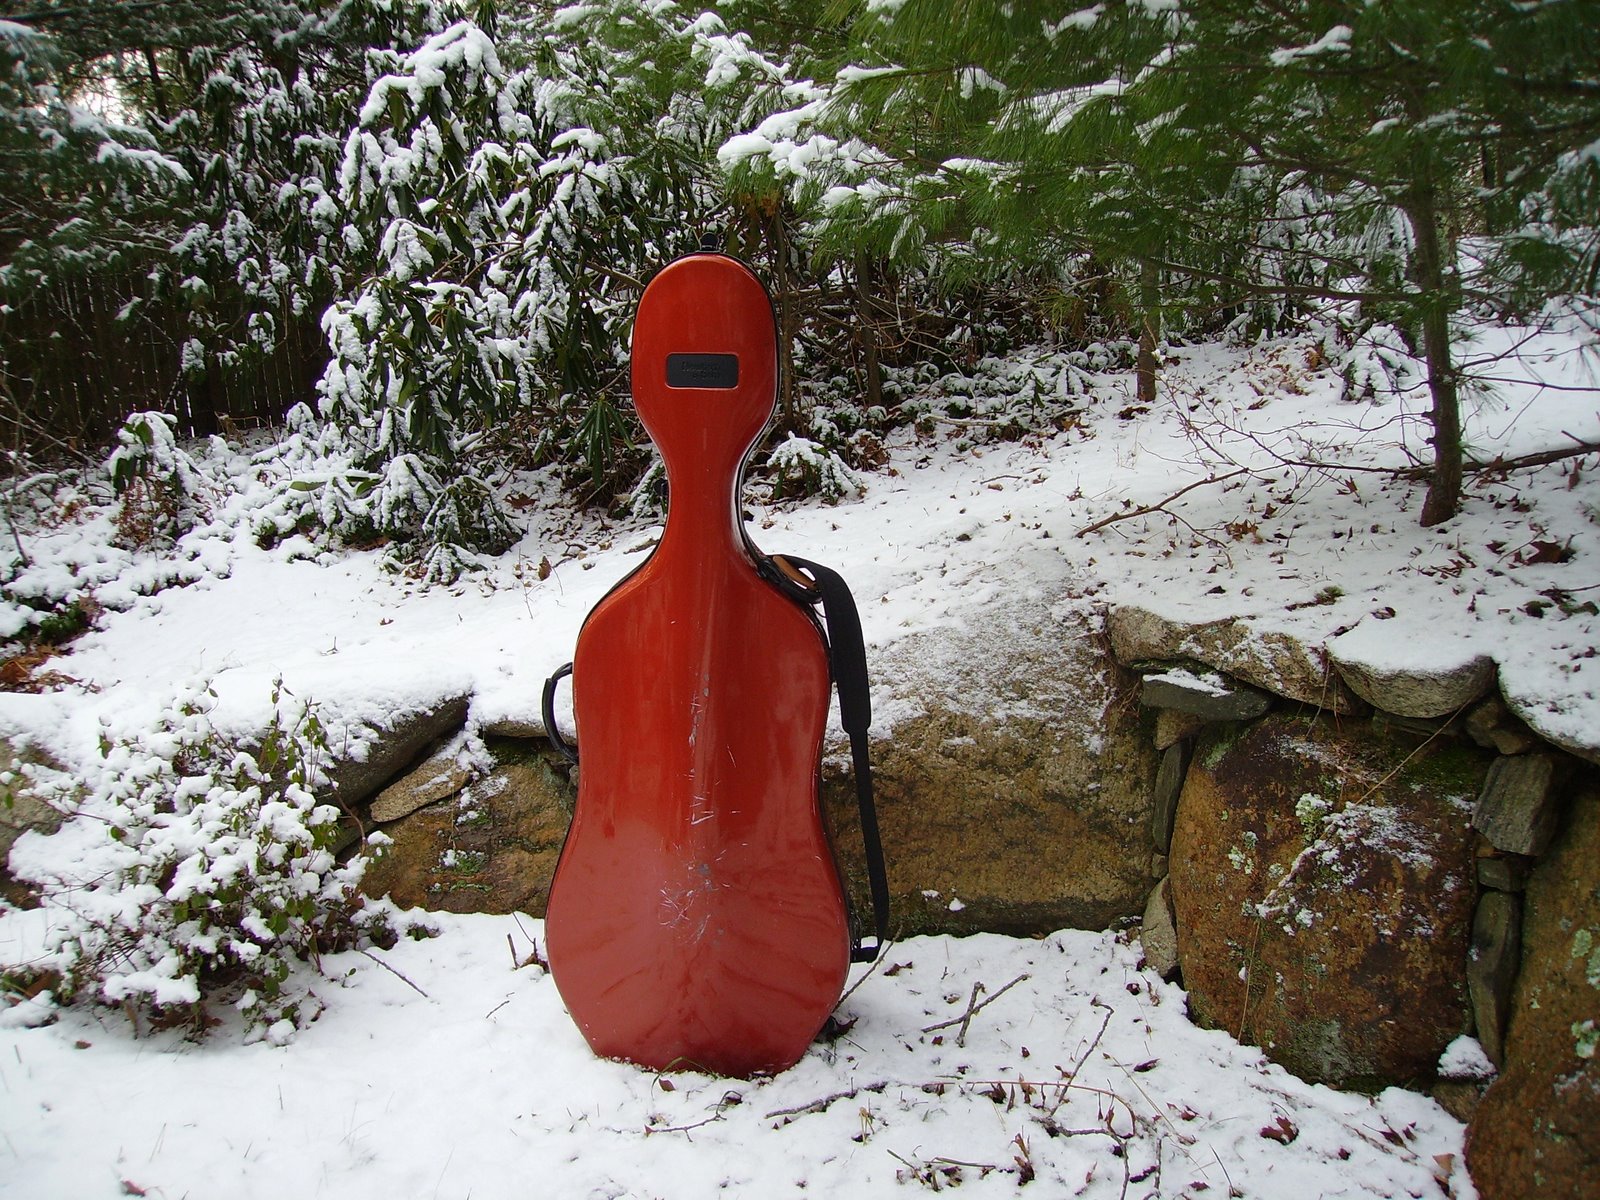 Cello in January